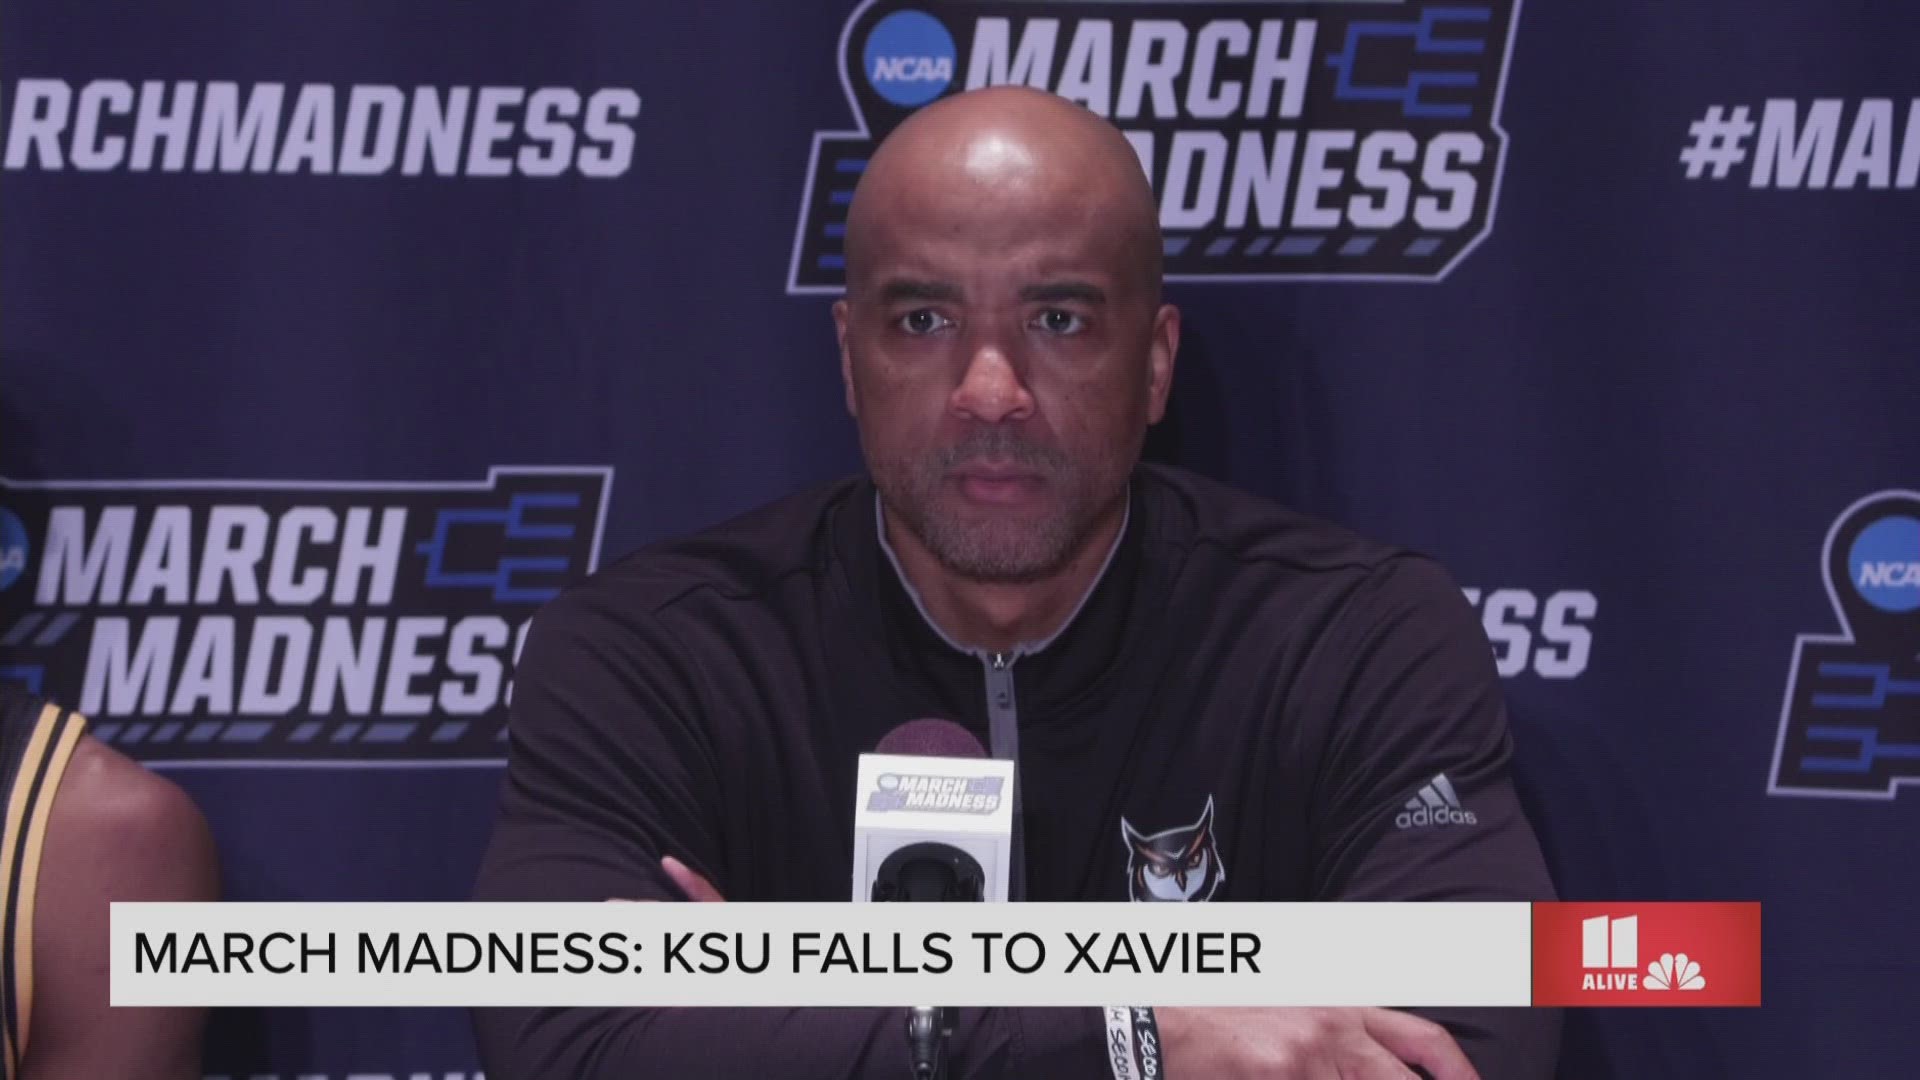 Coach Amir said the team has "nothing to hang their head about" after the Owls lost 72-67 to Xavier in the first round of the NCAA tournament.